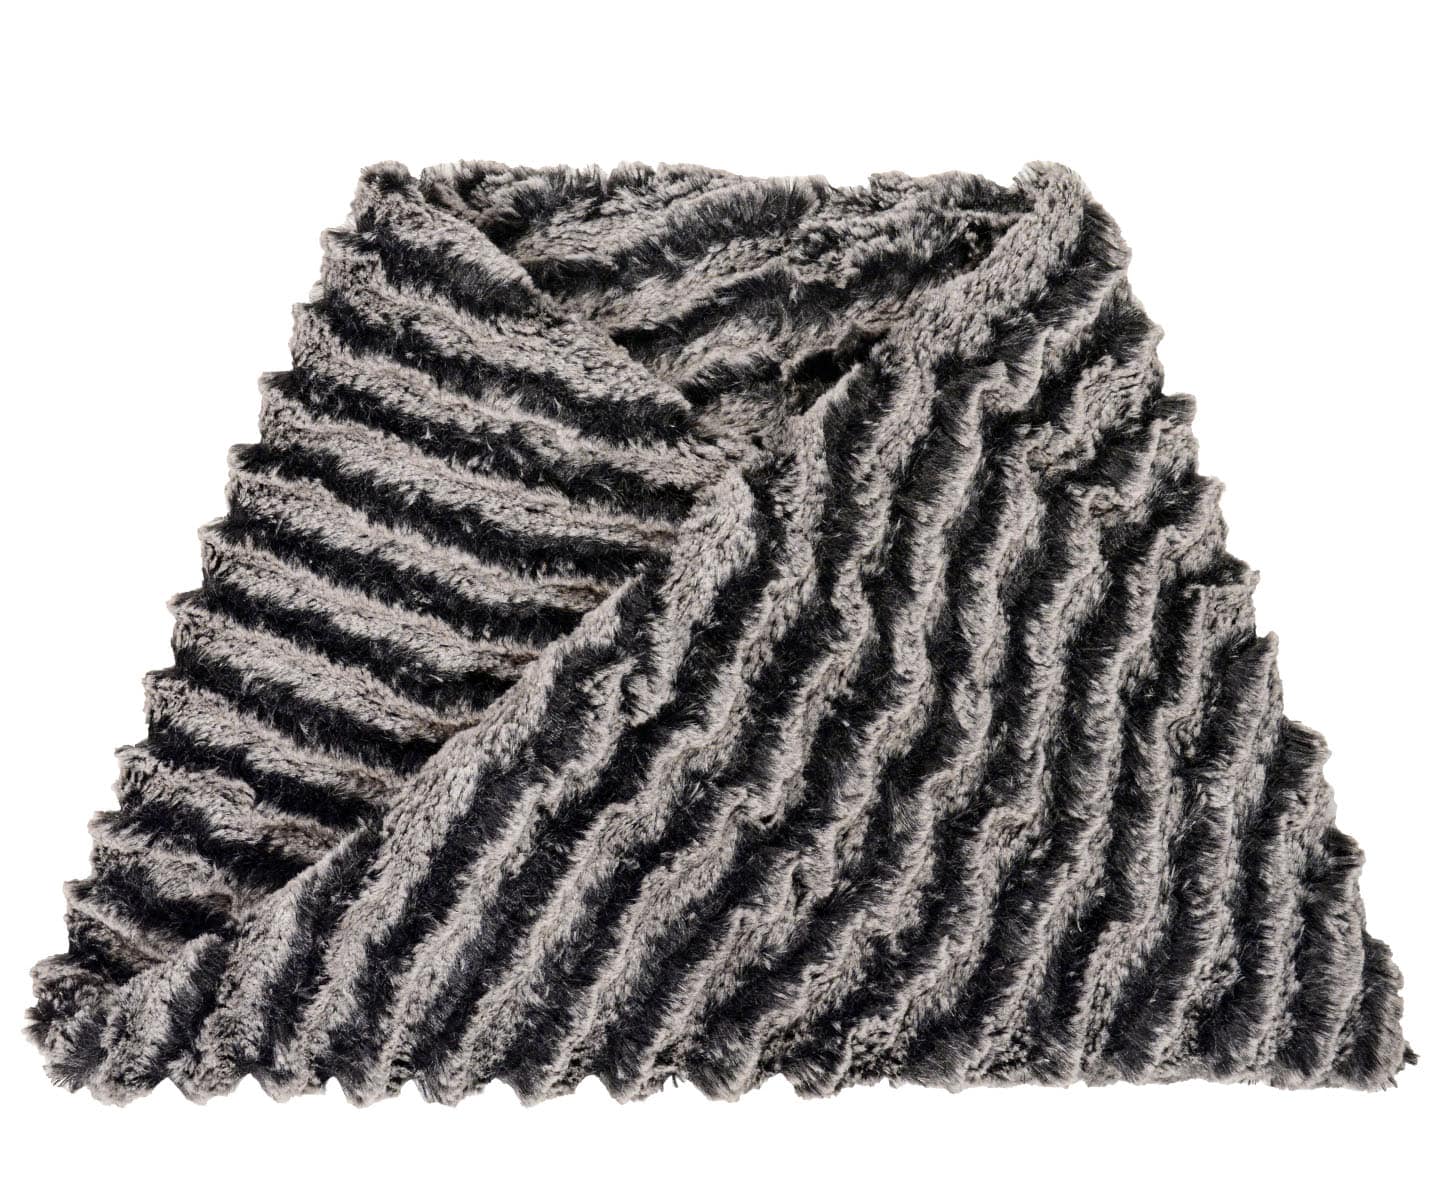 Neck Warmer | Desert Sand in Charcoal Faux Fur | Handmade in the USA by Pandemonium Seattle